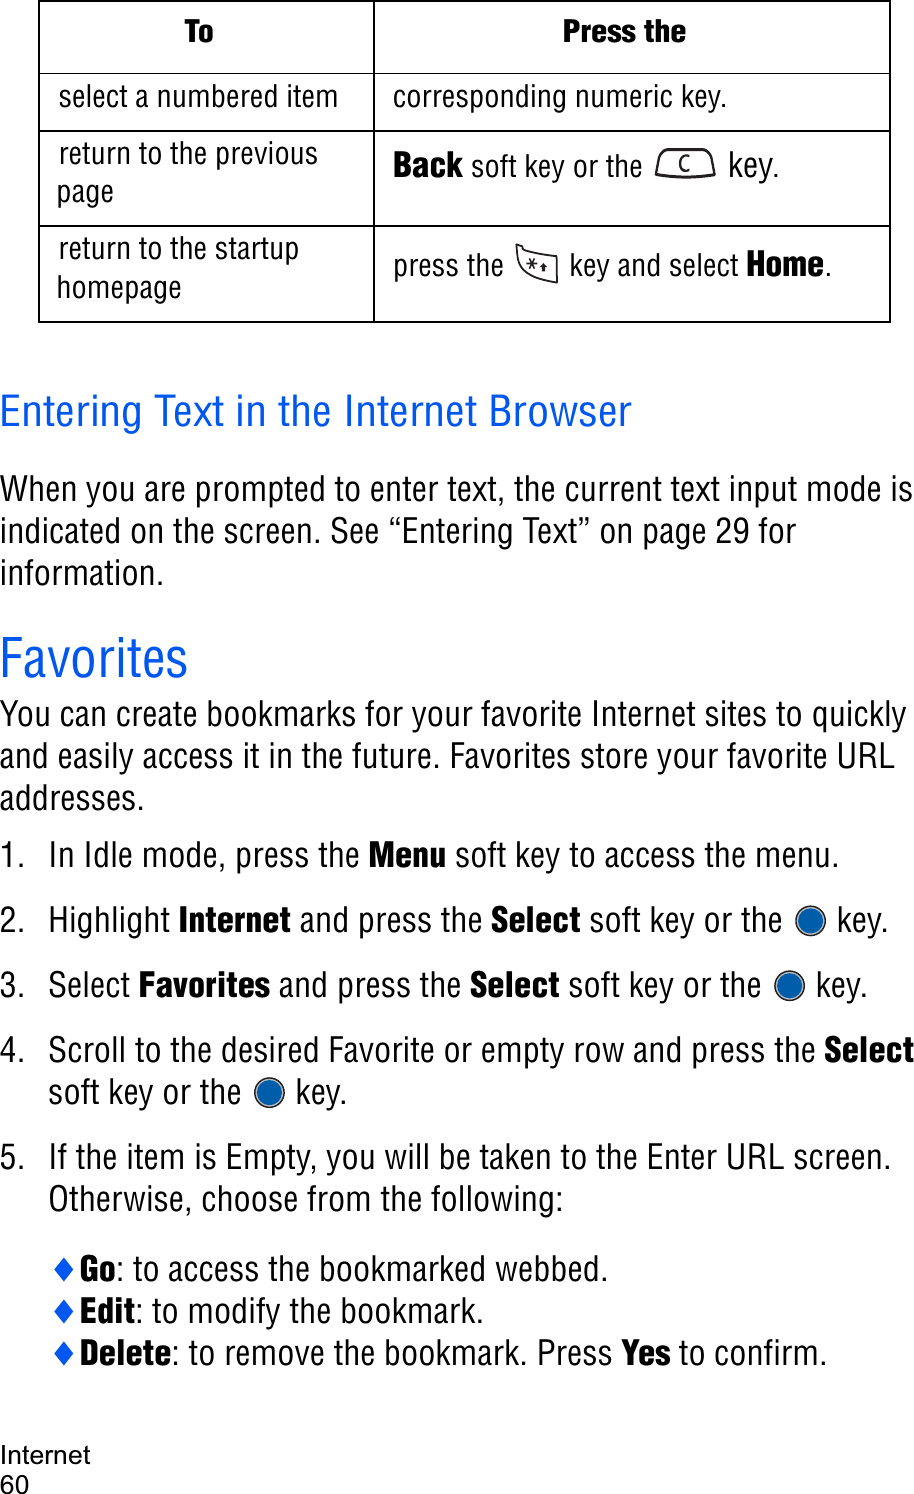 Internet60Entering Text in the Internet BrowserWhen you are prompted to enter text, the current text input mode is indicated on the screen. See “Entering Text” on page 29 for information.FavoritesYou can create bookmarks for your favorite Internet sites to quickly and easily access it in the future. Favorites store your favorite URL addresses.1. In Idle mode, press the Menu soft key to access the menu.2. Highlight Internet and press the Select soft key or the  key.3. Select Favorites and press the Select soft key or the  key.4. Scroll to the desired Favorite or empty row and press the Selectsoft key or the  key.5. If the item is Empty, you will be taken to the Enter URL screen. Otherwise, choose from the following:iGo: to access the bookmarked webbed.iEdit: to modify the bookmark.iDelete: to remove the bookmark. Press Yes to confirm.select a numbered item corresponding numeric key.return to the previous page Back soft key or the   key.return to the startup homepage press the   key and select Home.To Press the